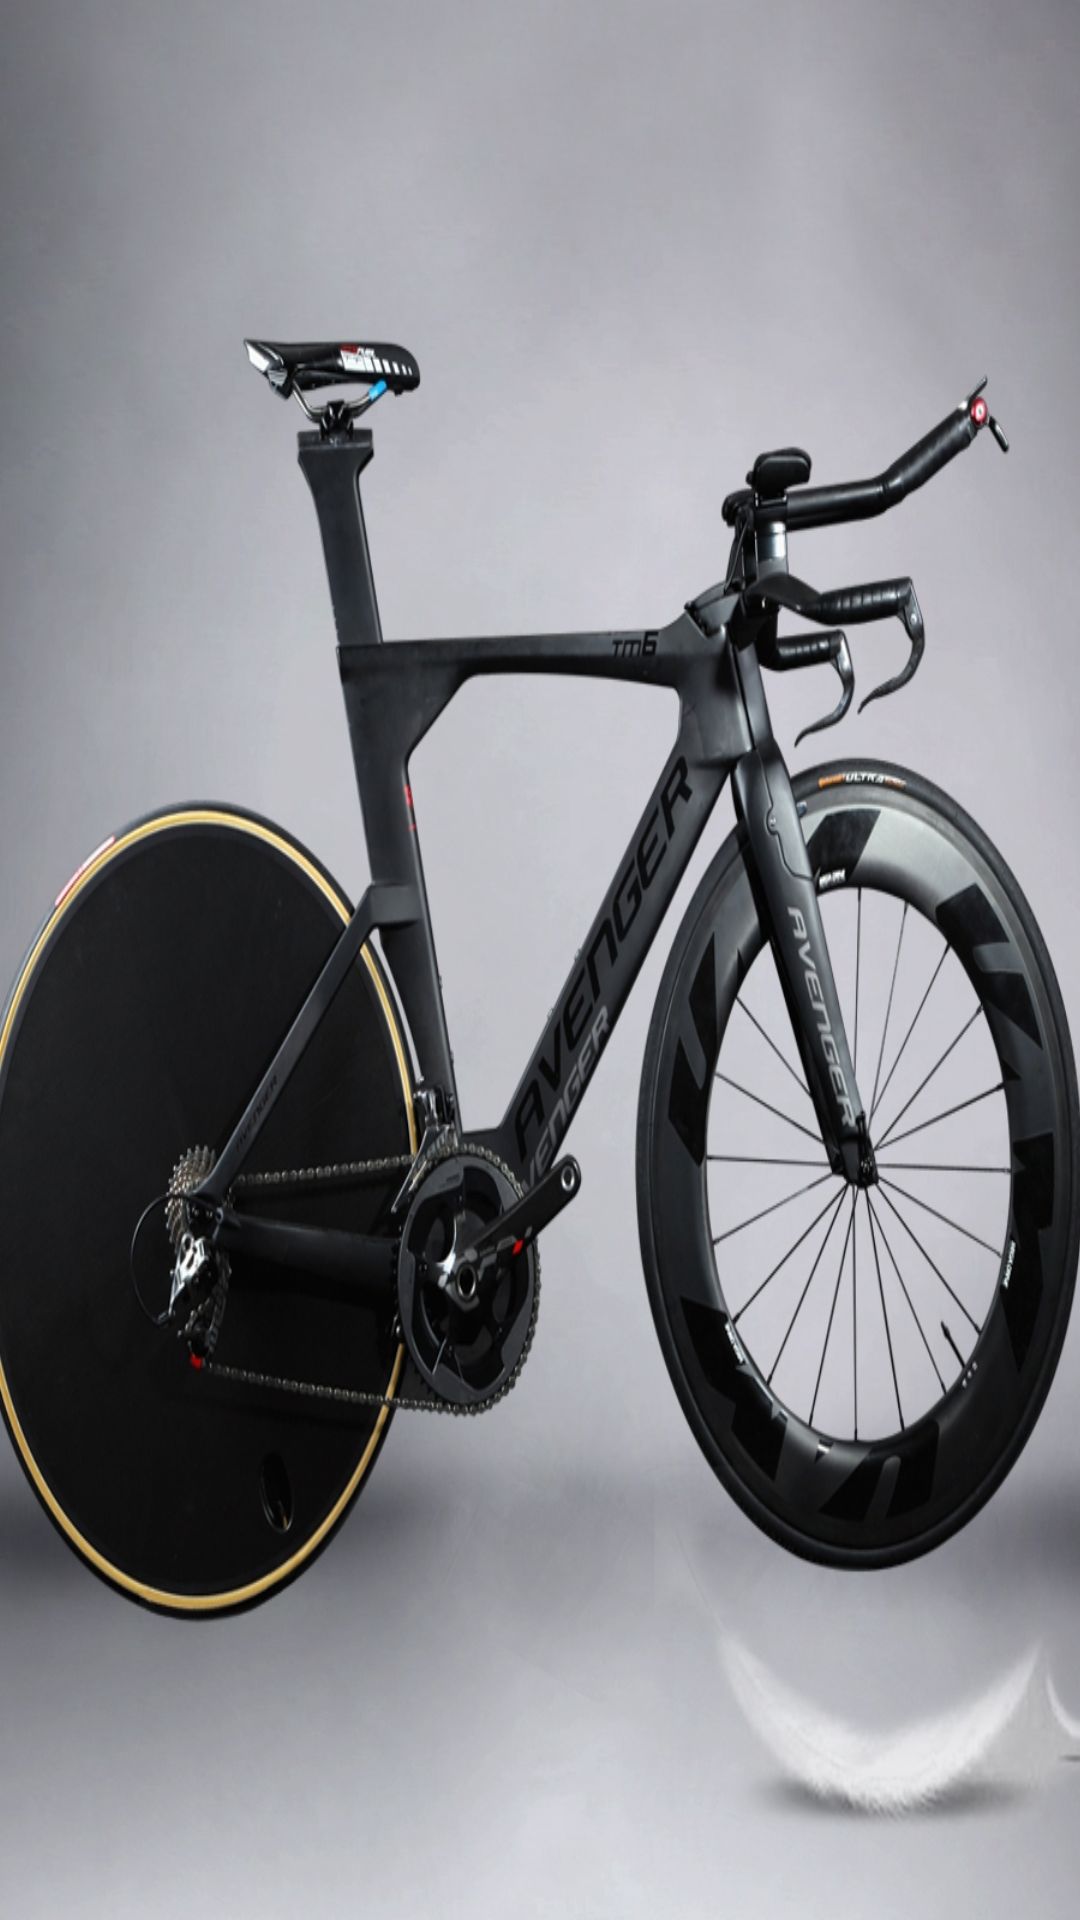 World's Most Expensive Bicycles, That Cost Even More Than Audi or BMW Cars